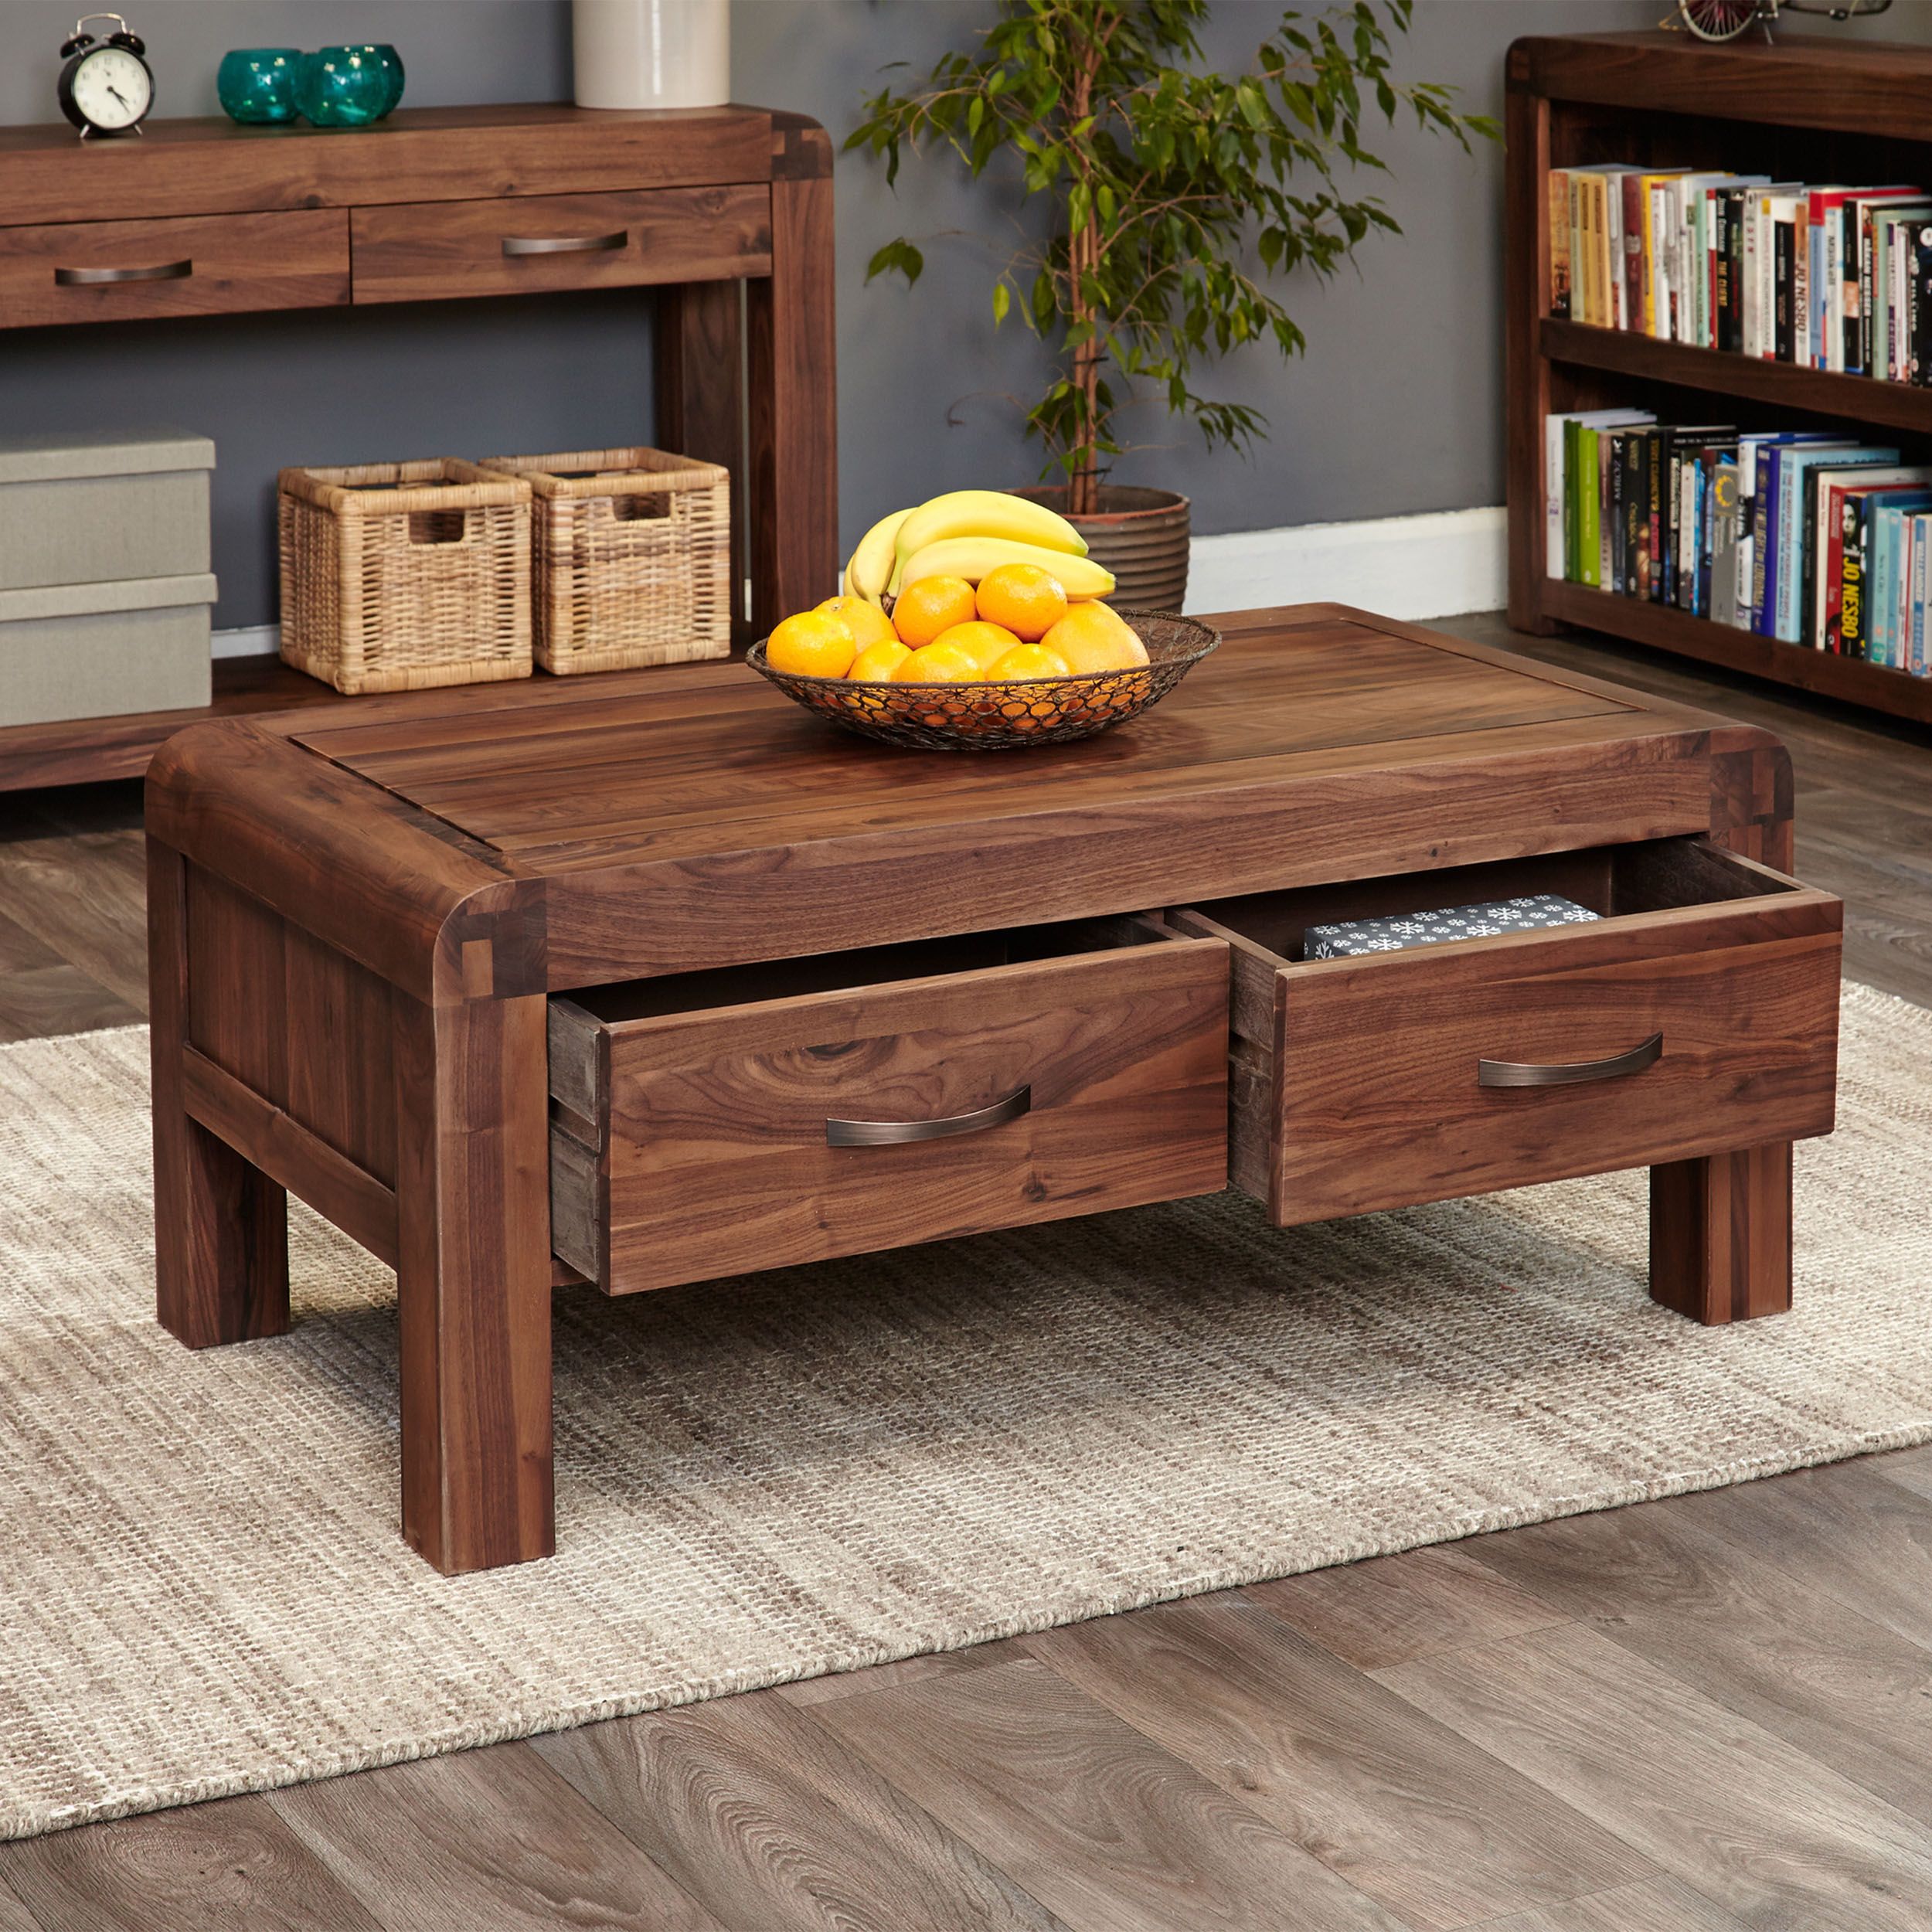 Solid Walnut Coffee Table With Storage – Shiro Throughout Coffee Tables With Open Storage Shelves (View 2 of 20)